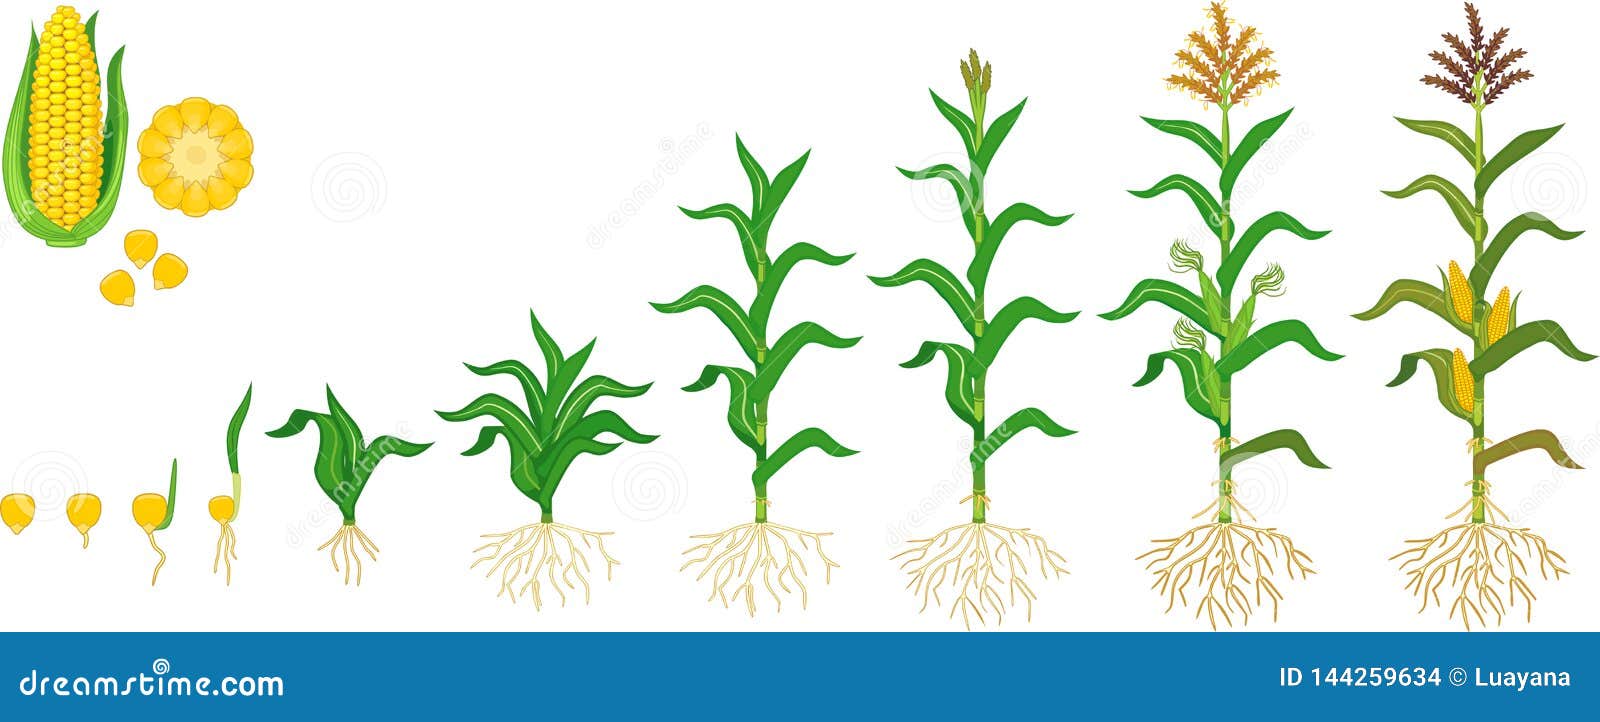 life cycle of corn maize plant. growth stages from seeding to flowering and fruiting plant  on white background